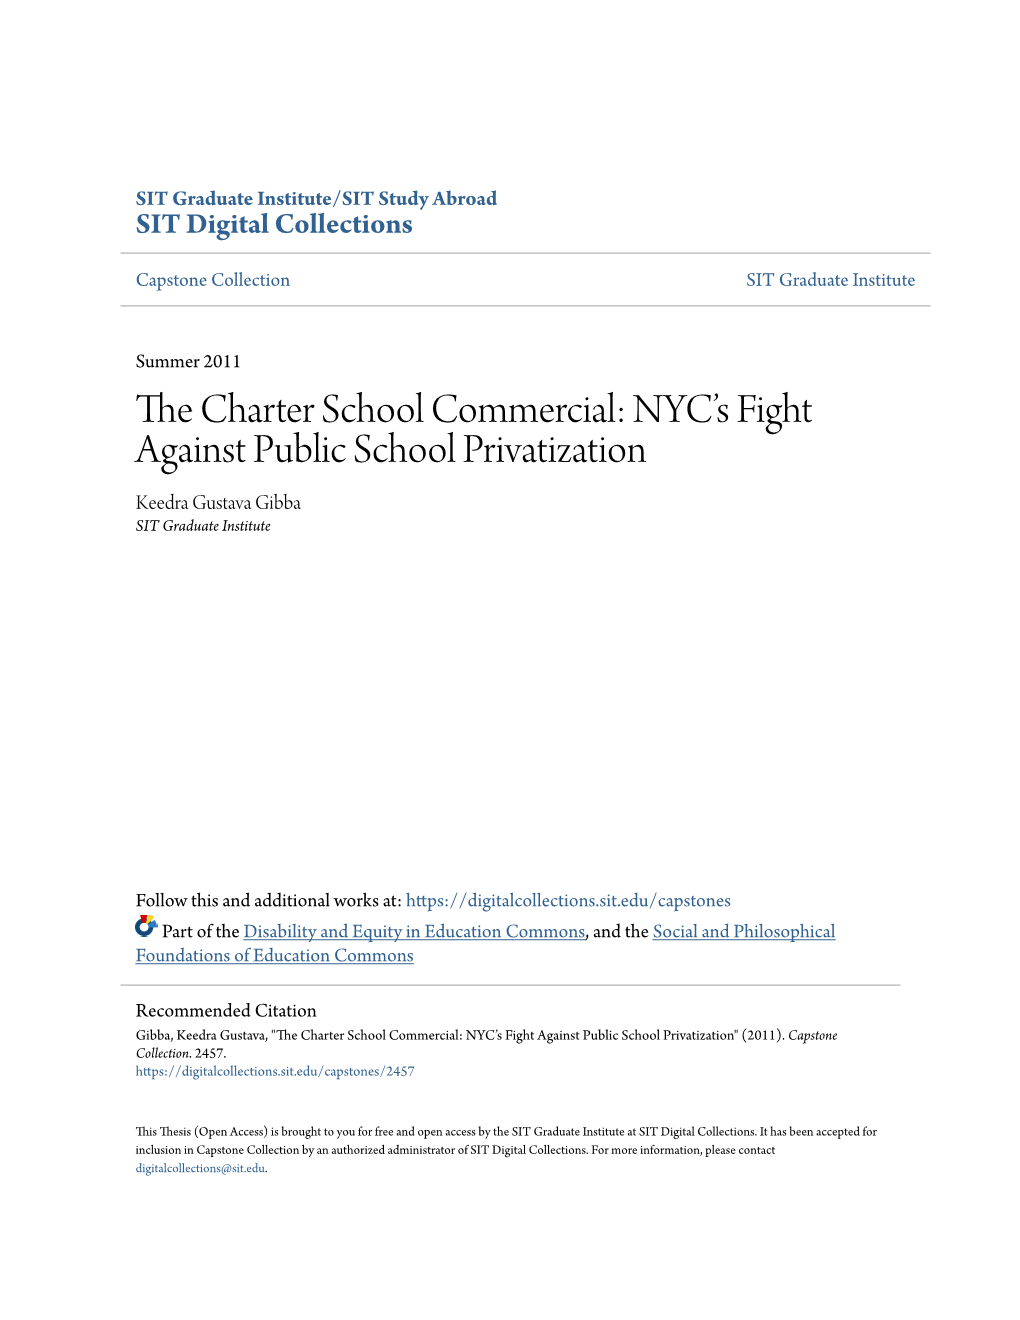 The Charter School Commercial: Nyc’S Fight Against Public School Privatization